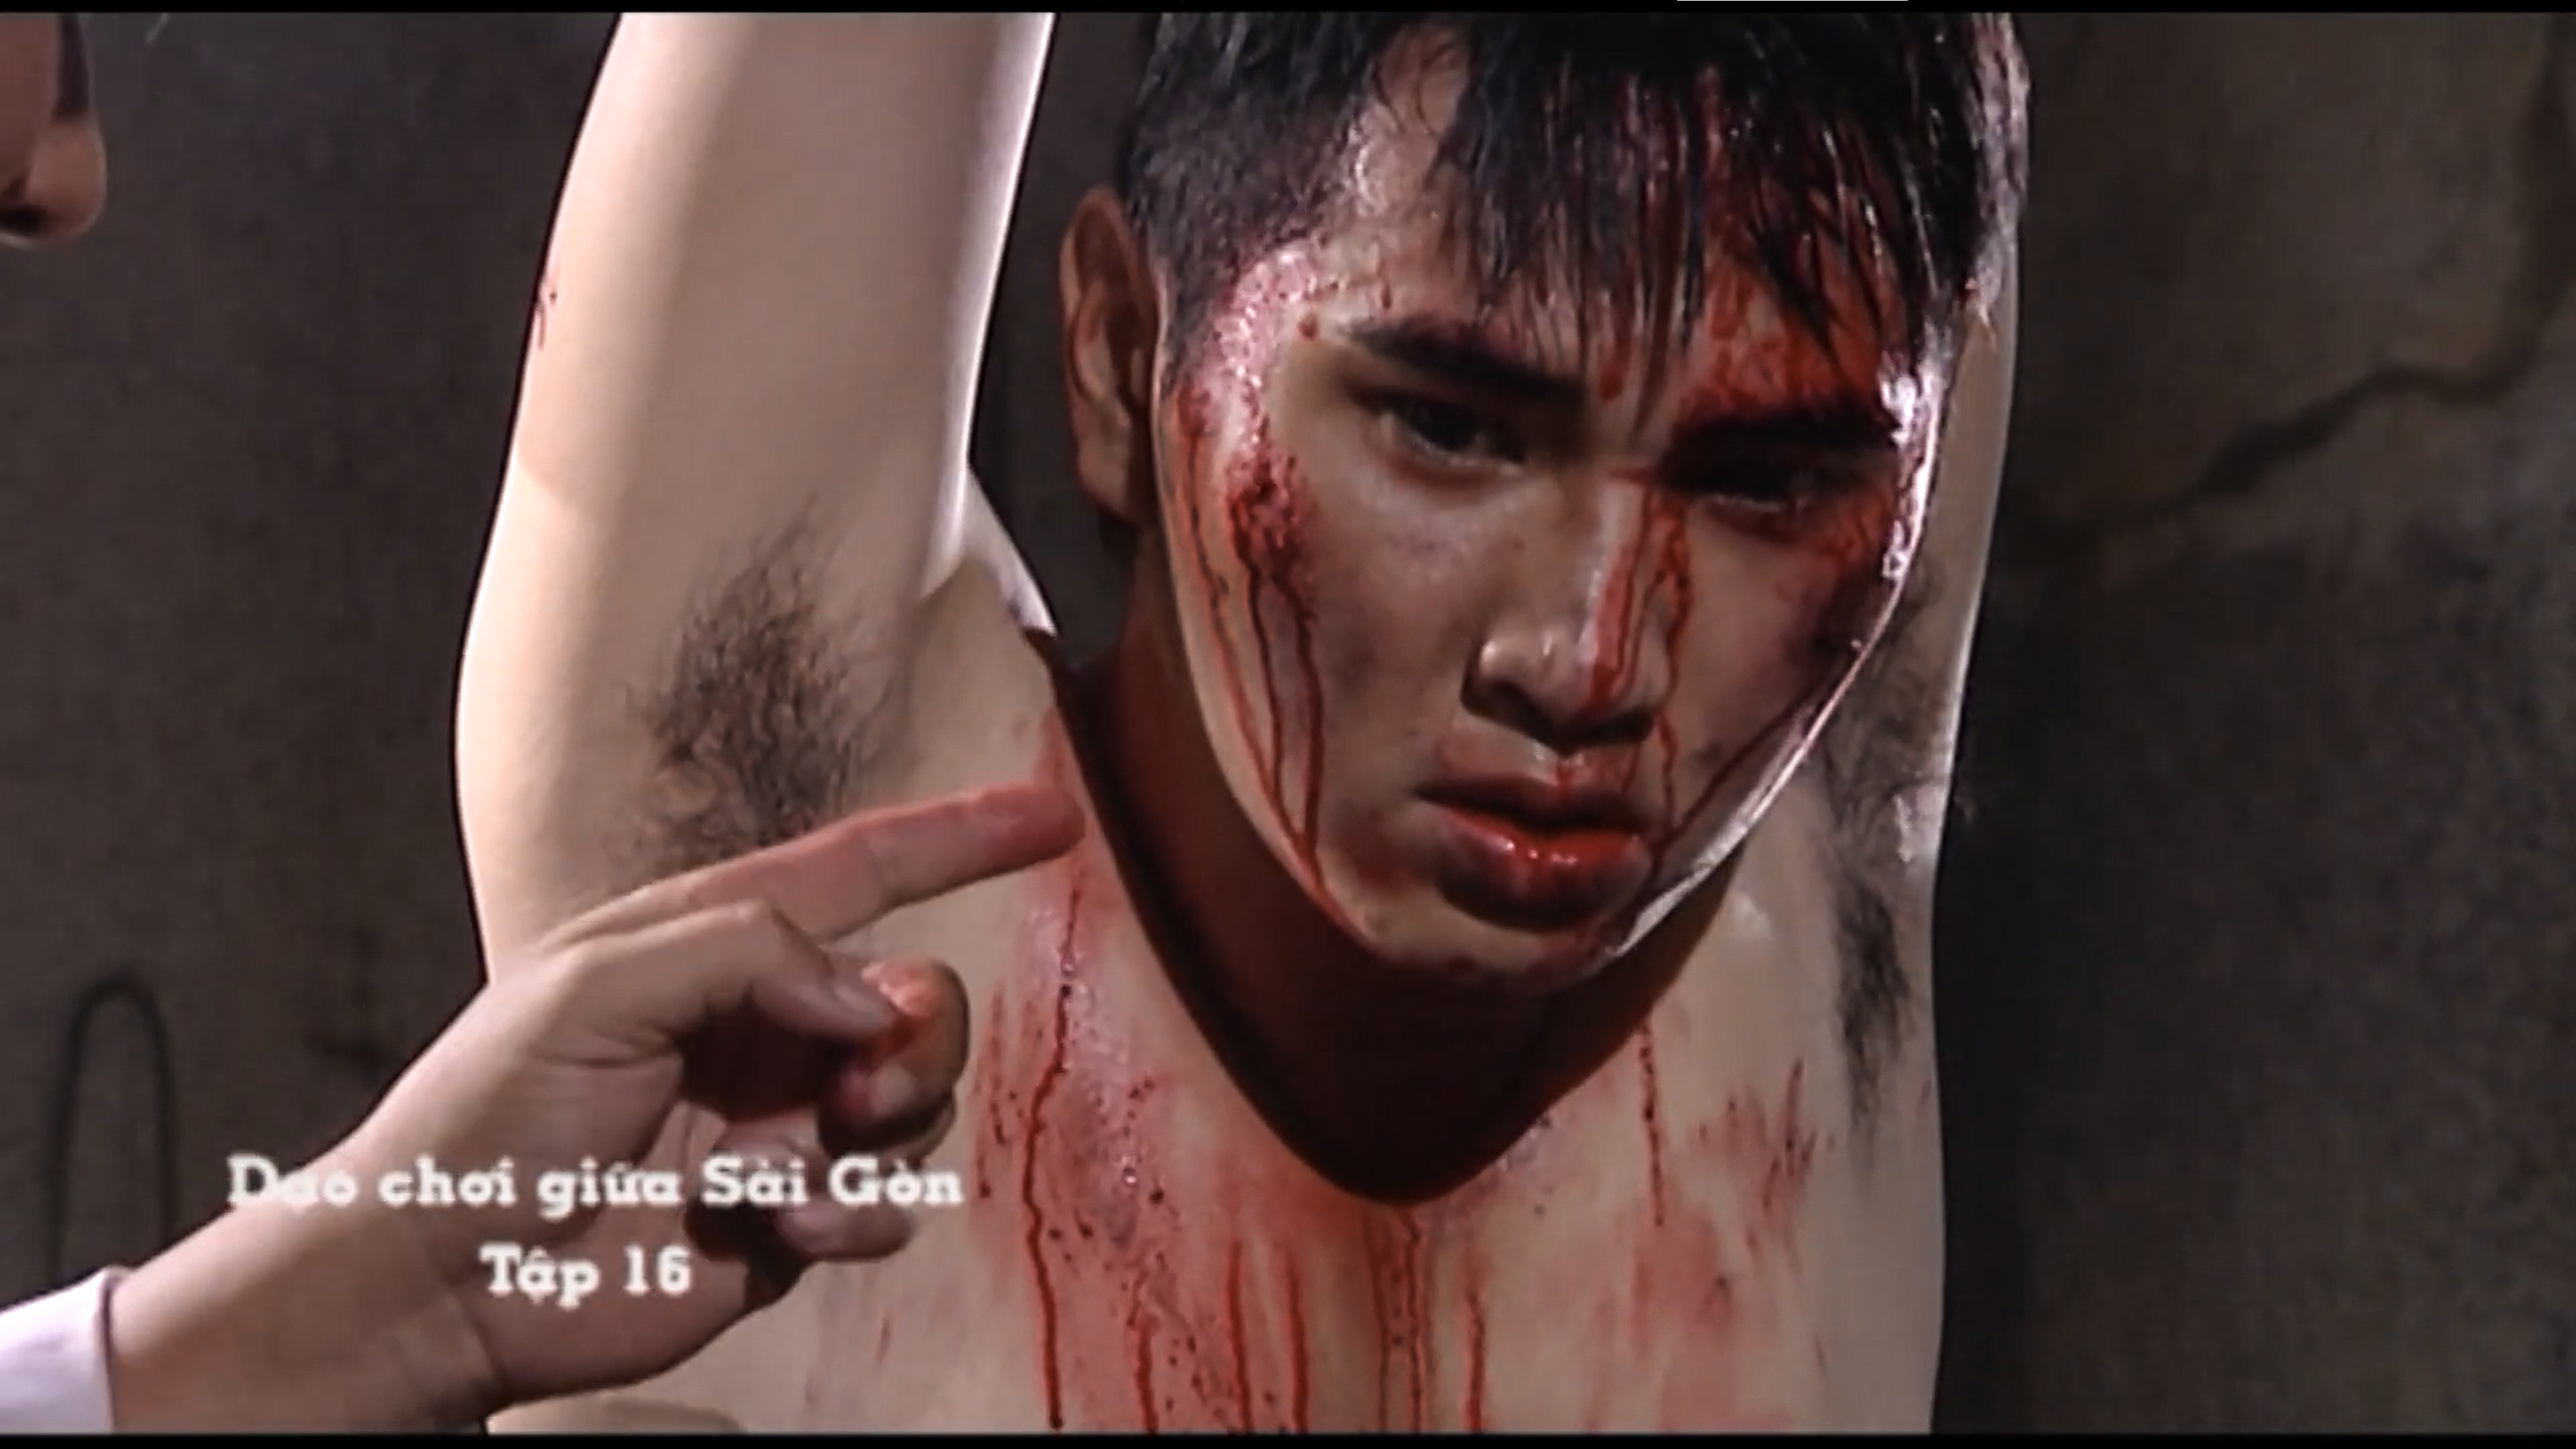 Torture one by one for testimony (Movie scene)